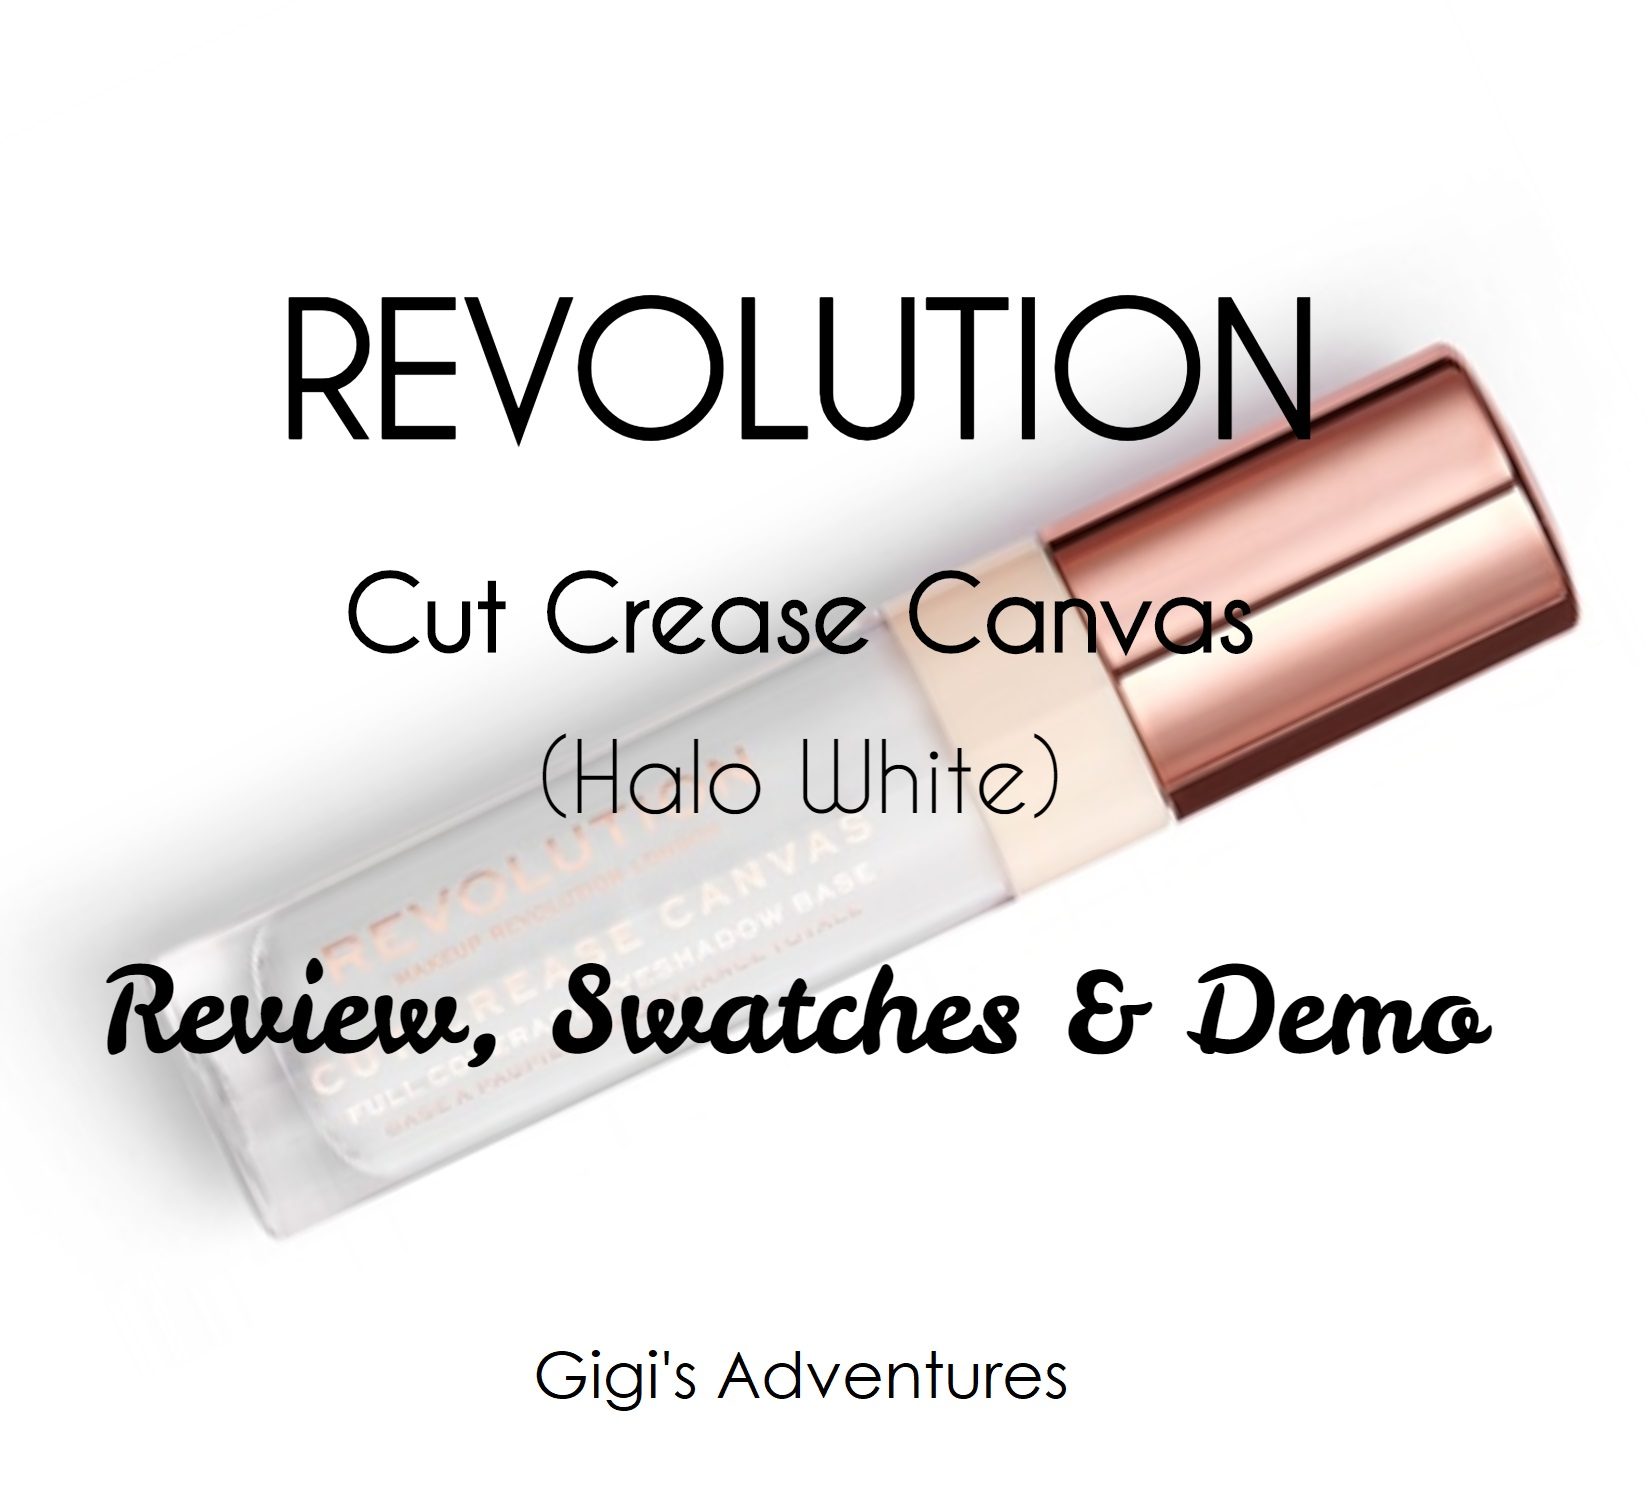 Revolution Cut Crease Canvas 'Halo White' Review - P. Louise Dupe?